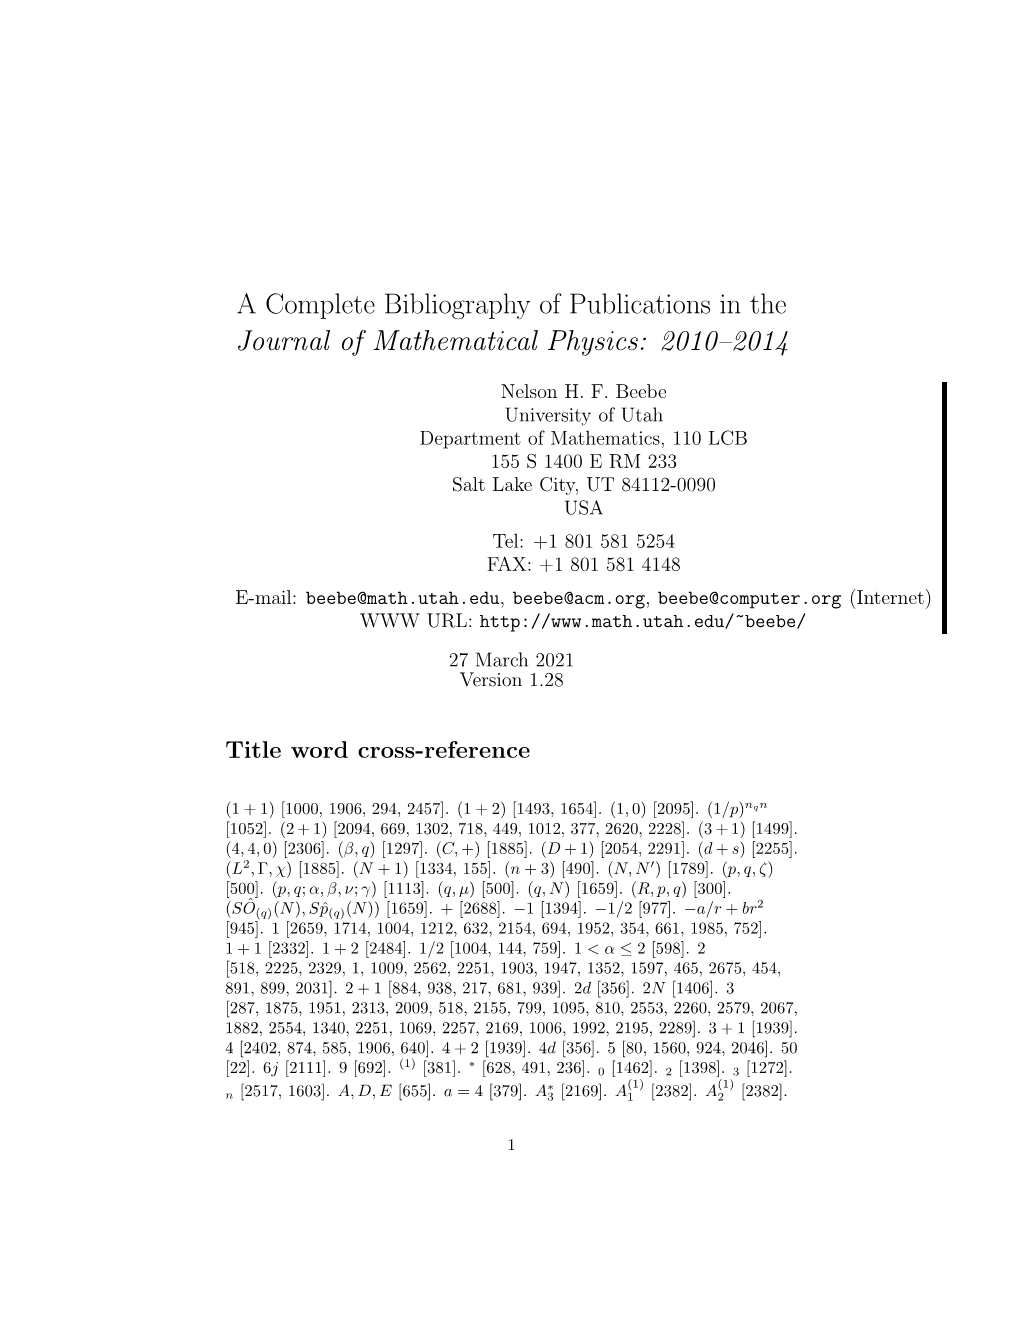 A Complete Bibliography of Publications in the Journal of Mathematical Physics: 2010–2014